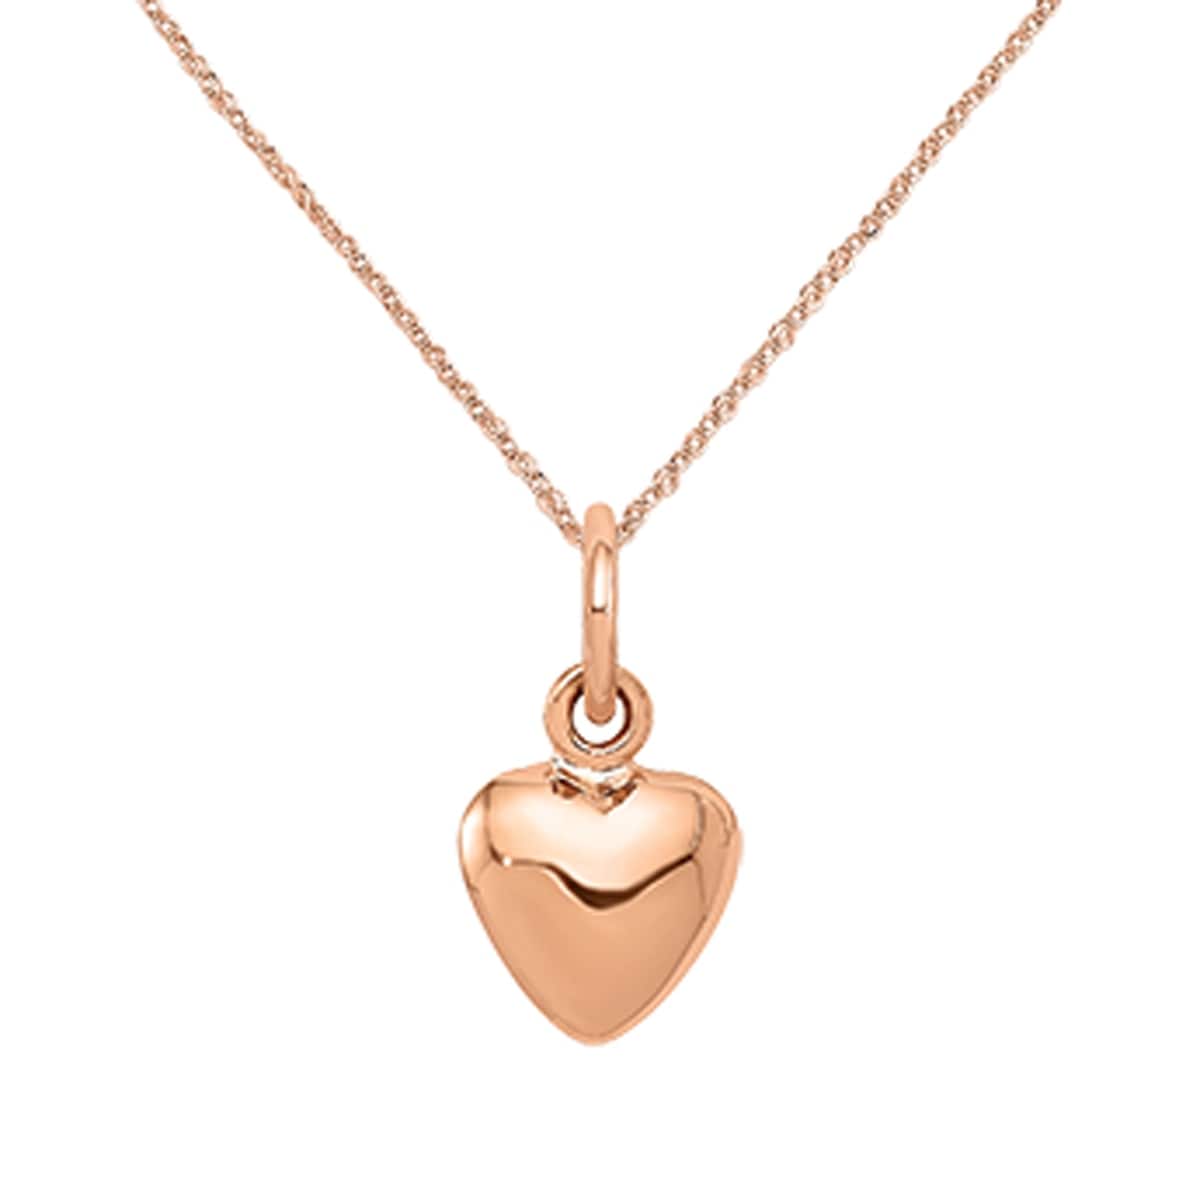 Heart Pendant with Flowers Charm Solid 14k Yellow White Rose Gold Diamond Cut Tri Color 15 x 18 mm